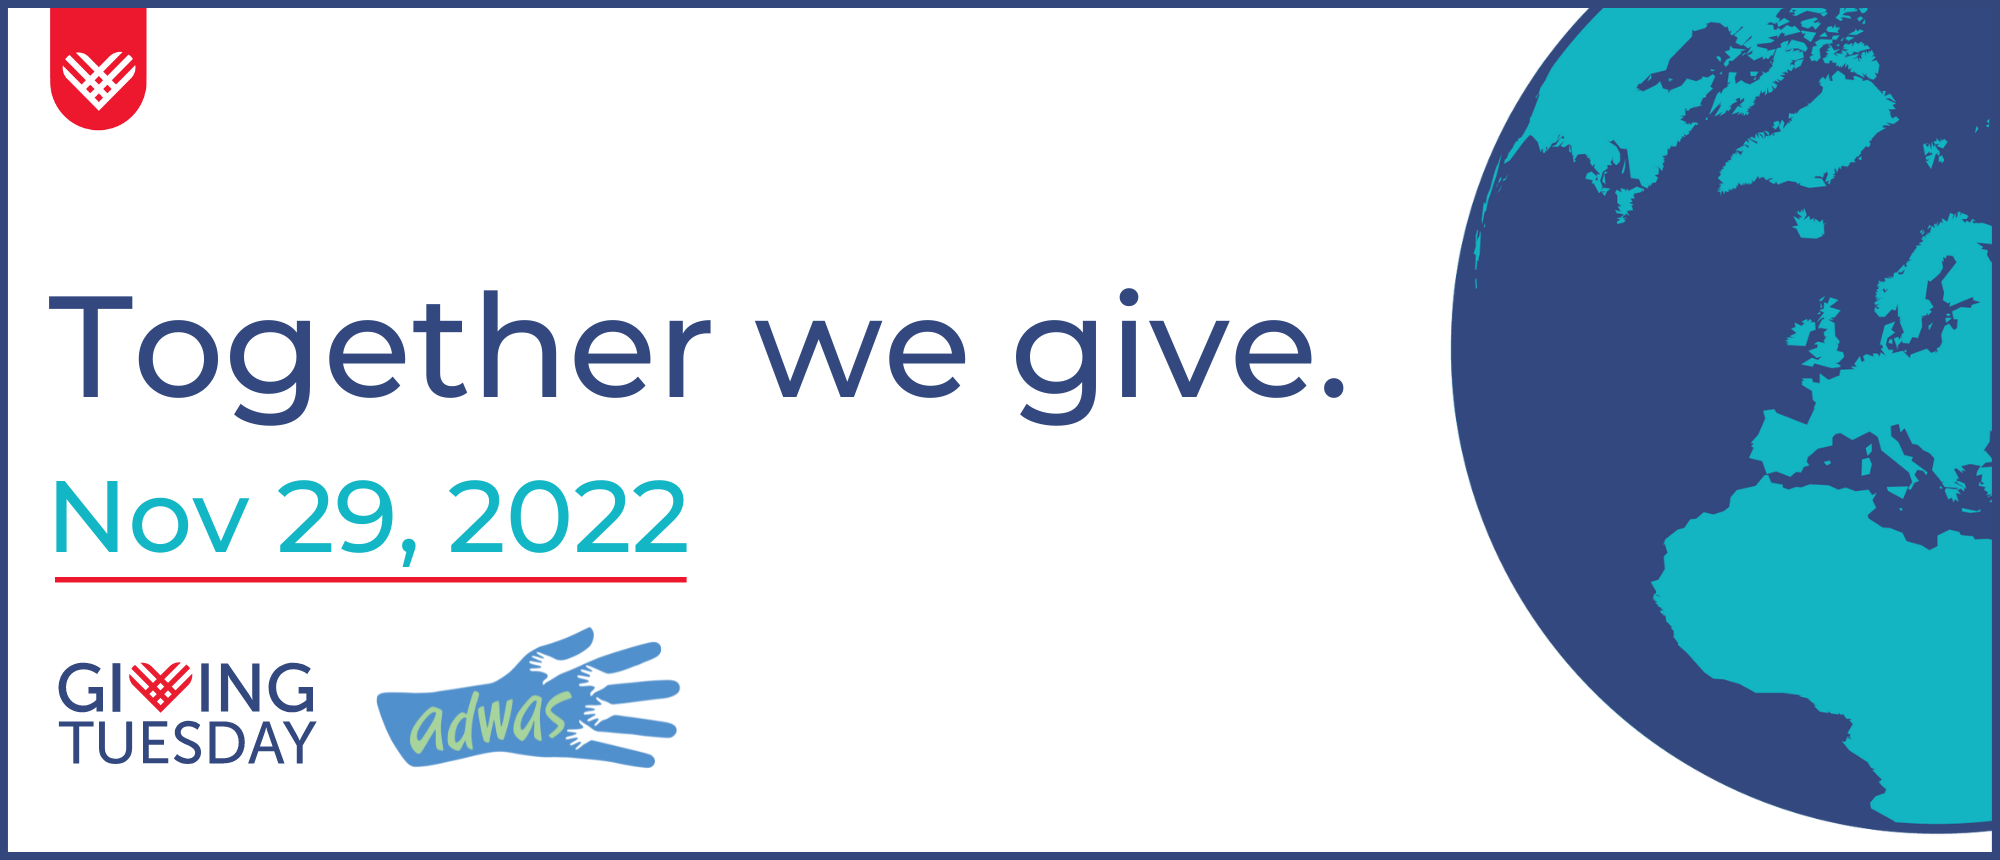 [ID: A decorative flyer for GivingTuesday that says "Together we give." GivingTuesday is on November 29, 2022. There is a picture of a globe along with GivingTuesday's logo and ADWAS' logo.]